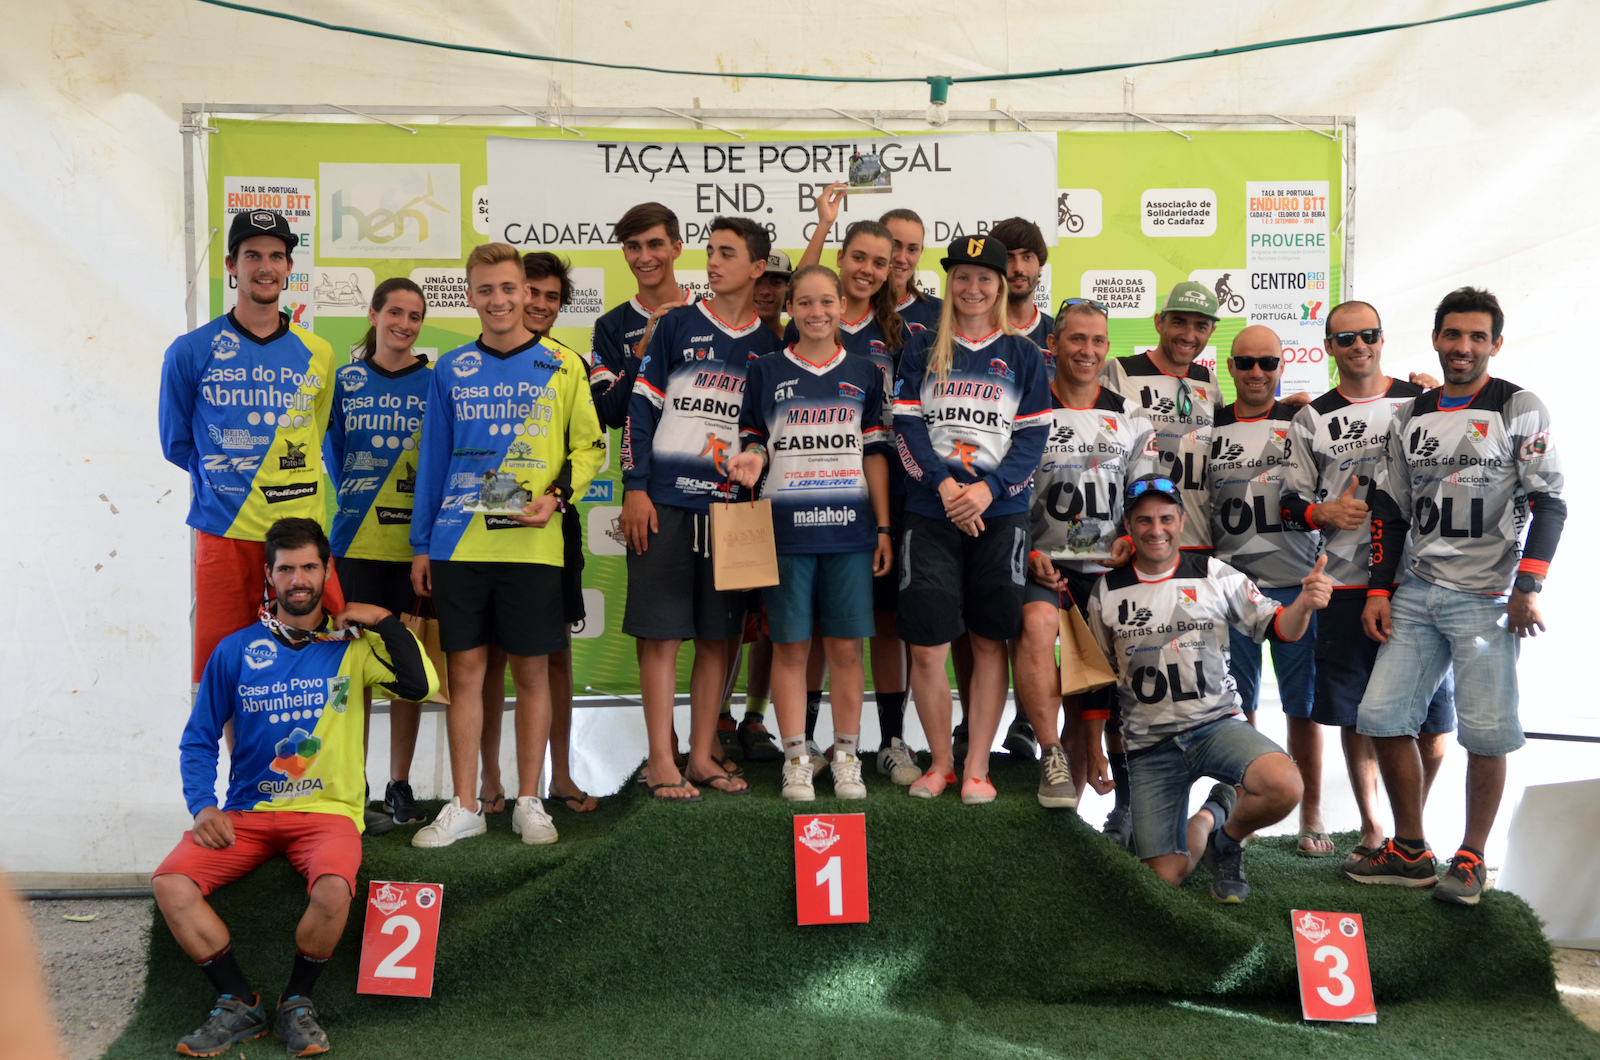 Teams podium, is really important in Portugal to be the winner club at the end of the season as that means the club can opt for some help from local government for their riders